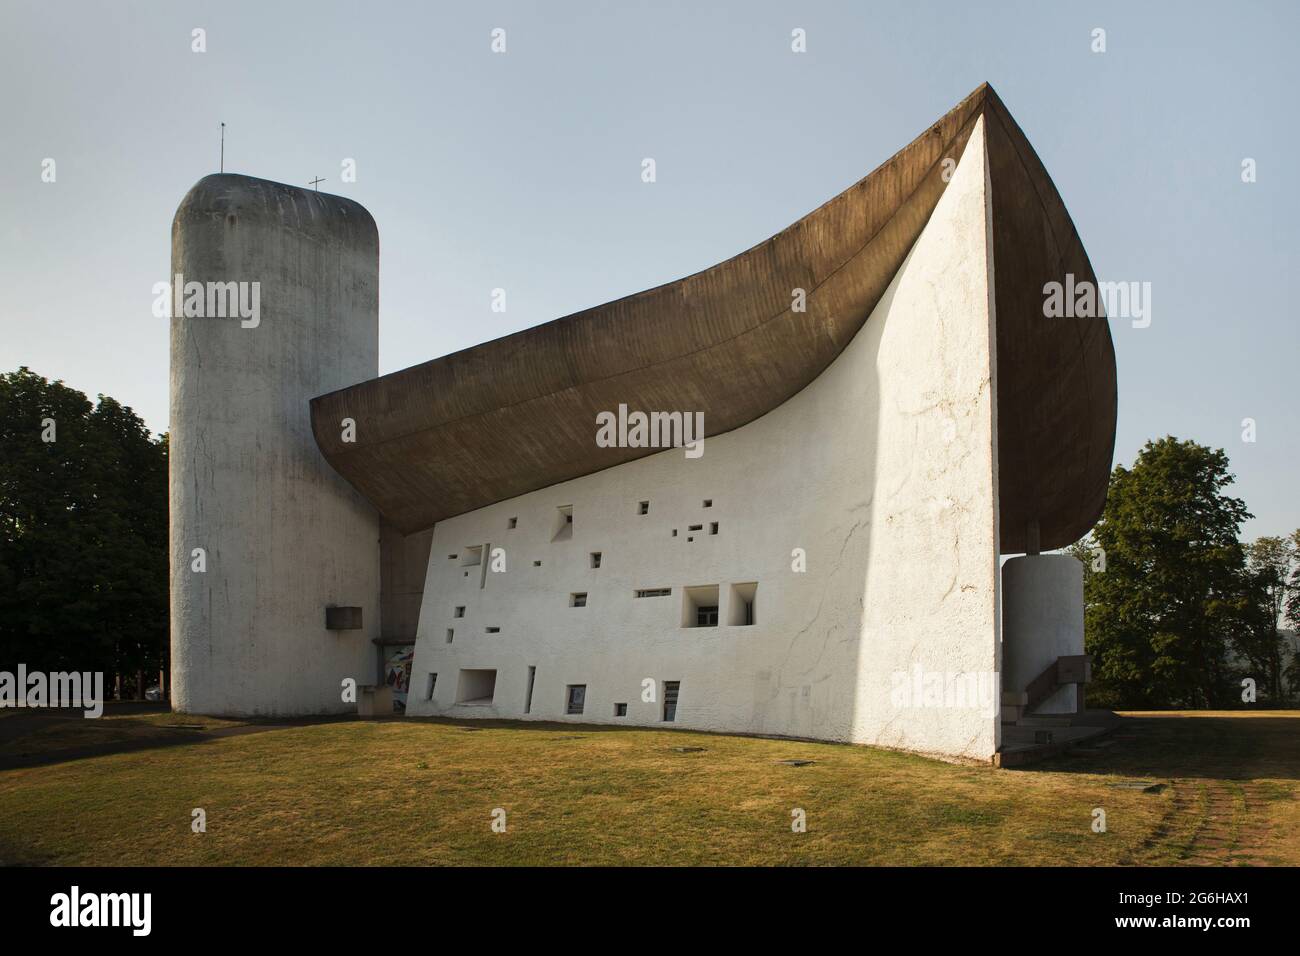 Chapel of Notre Dame du Haut designed by Swiss modernist architect Le Corbusier (1955) in Ronchamp, France. South facade of the chapel. Stock Photo